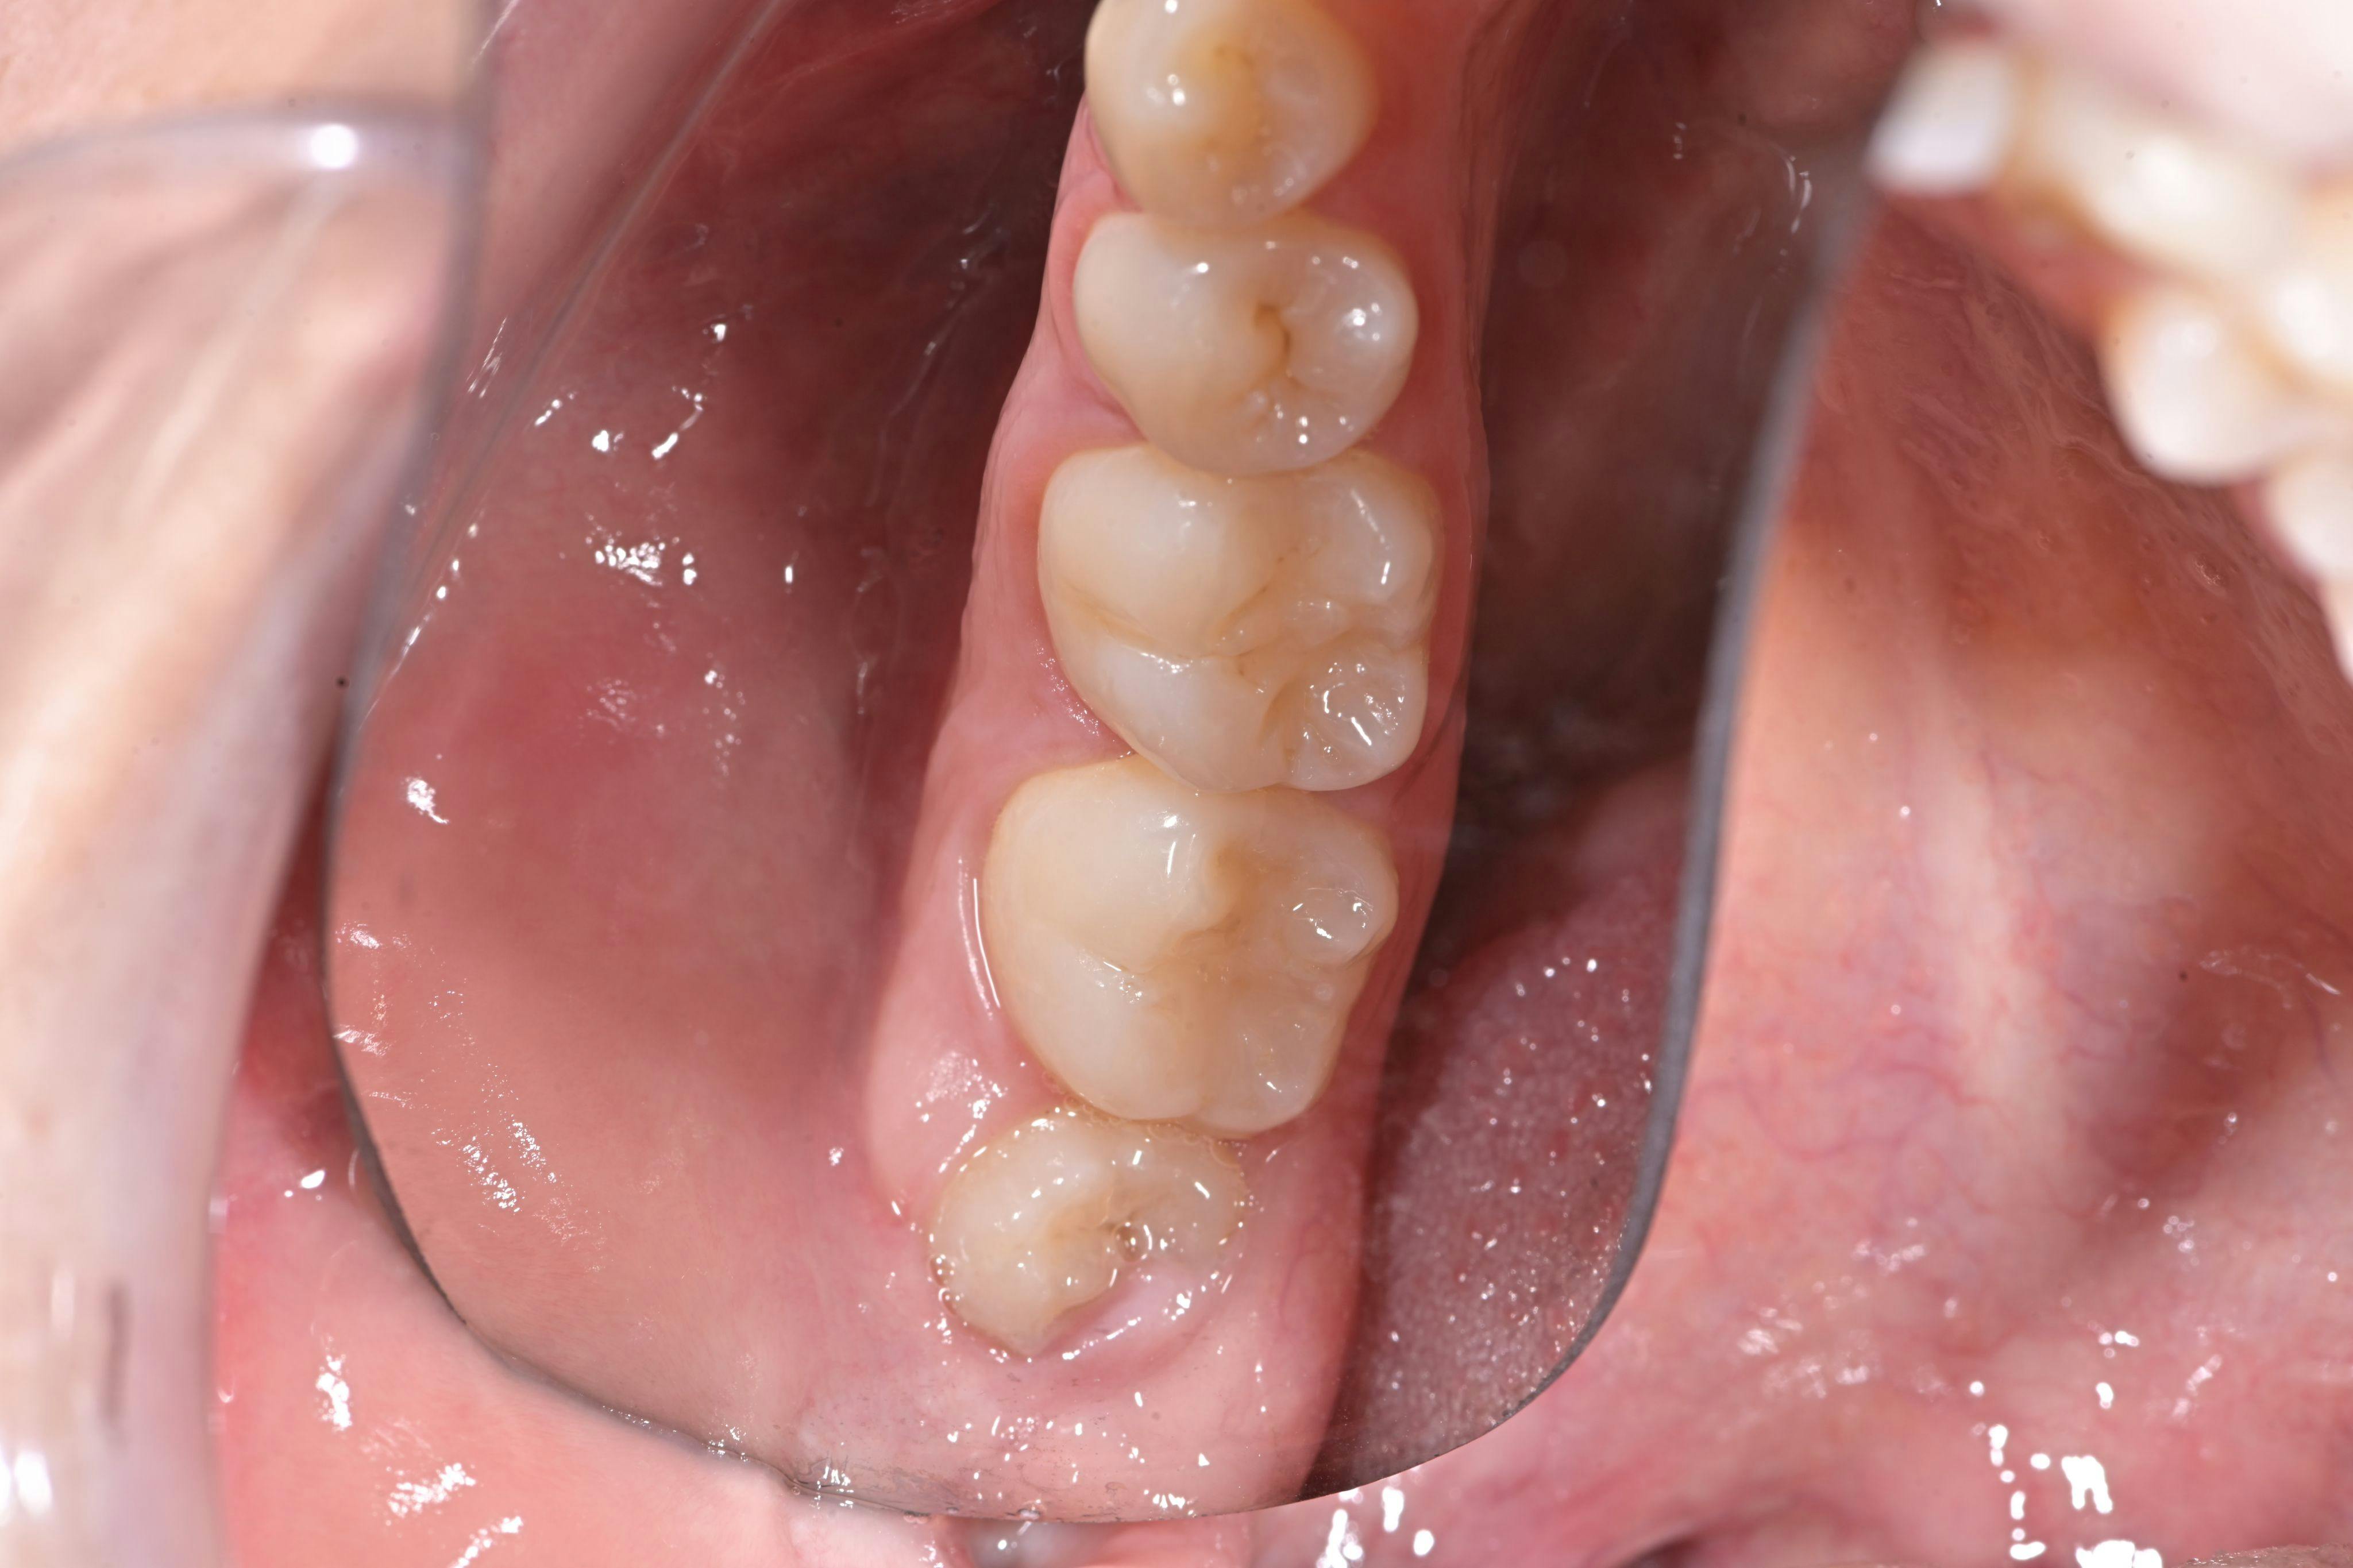 Posterior lower right occlusal